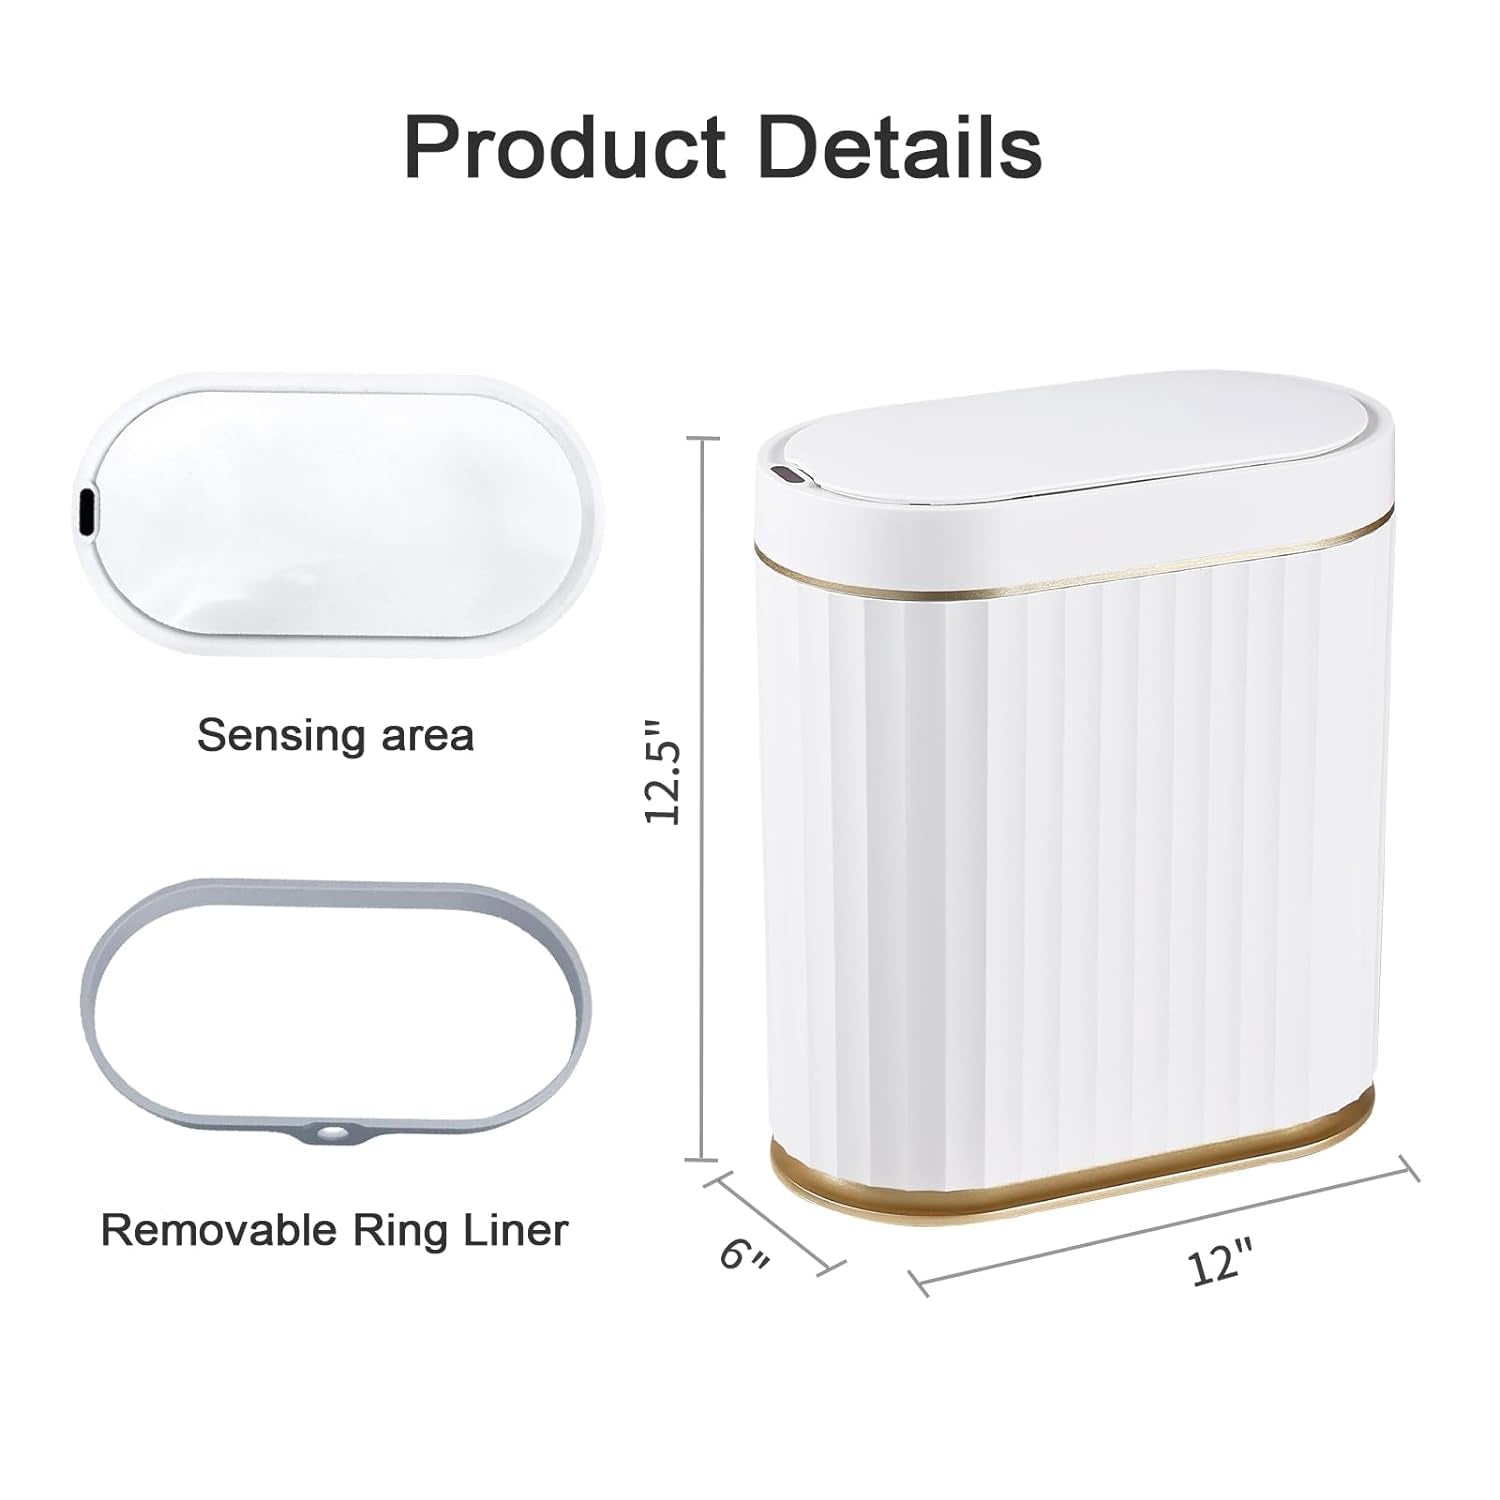 Bathroom Trash Can with Lid Waterproof Automatic Trash Can, 2 Gallon Slimline Smart Trash Can, 9 L Narrow Motion Sensor Trash Can for Bedroom, Bathroom, Kitchen, Office, White with Gold Trim